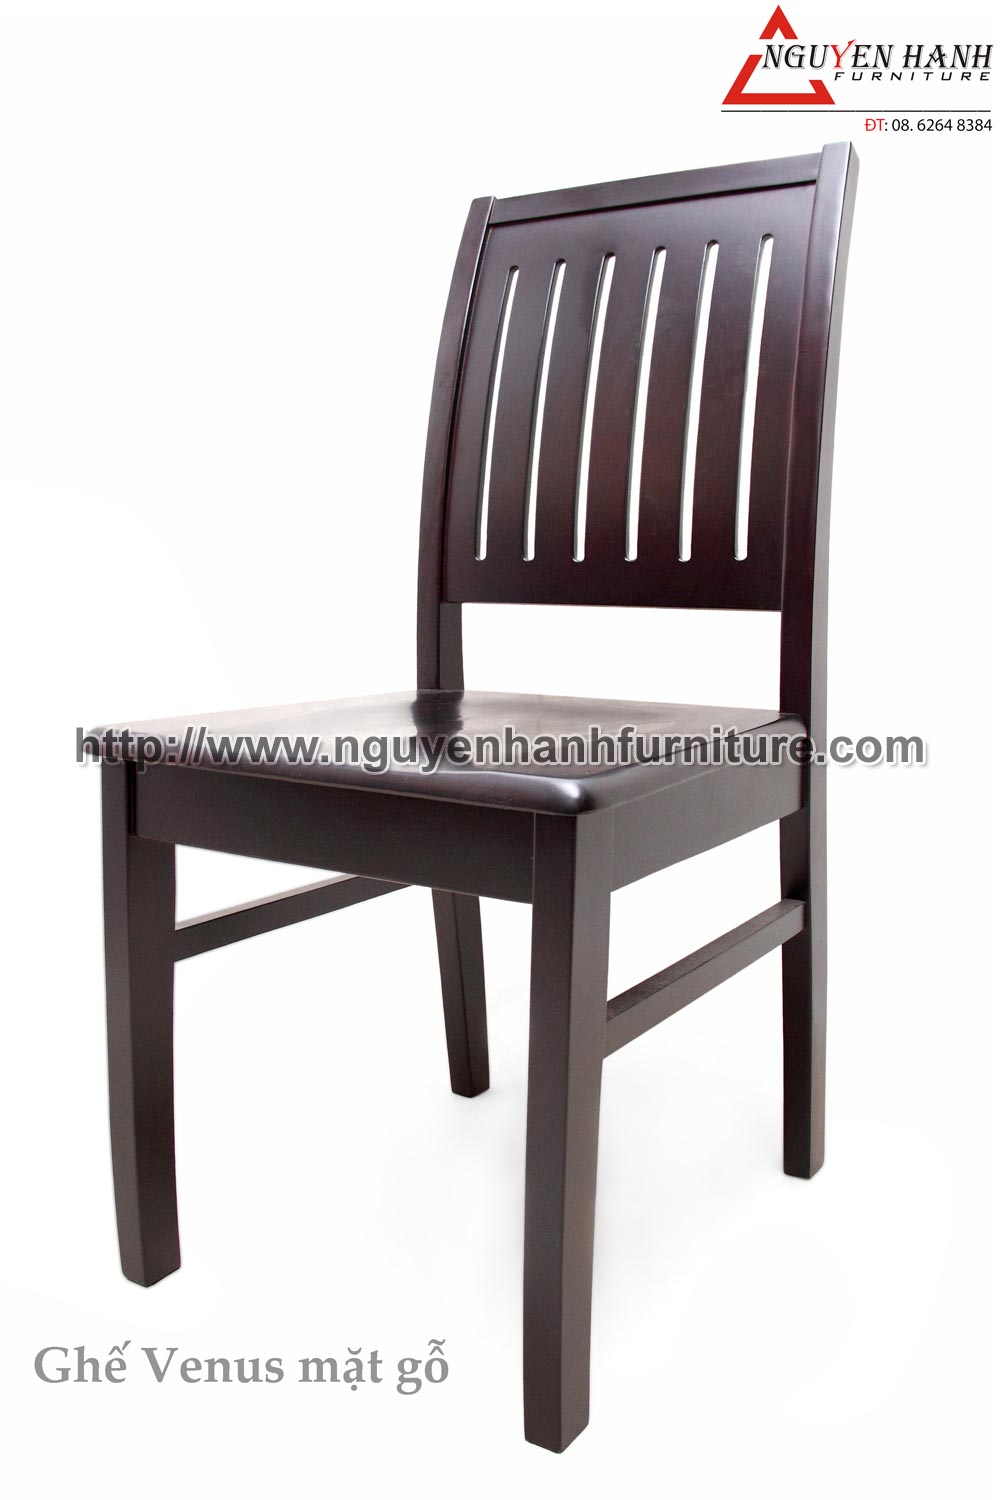 Name product: Venus chair with wooden surface- Dimensions:  - Description: Wood natural rubber